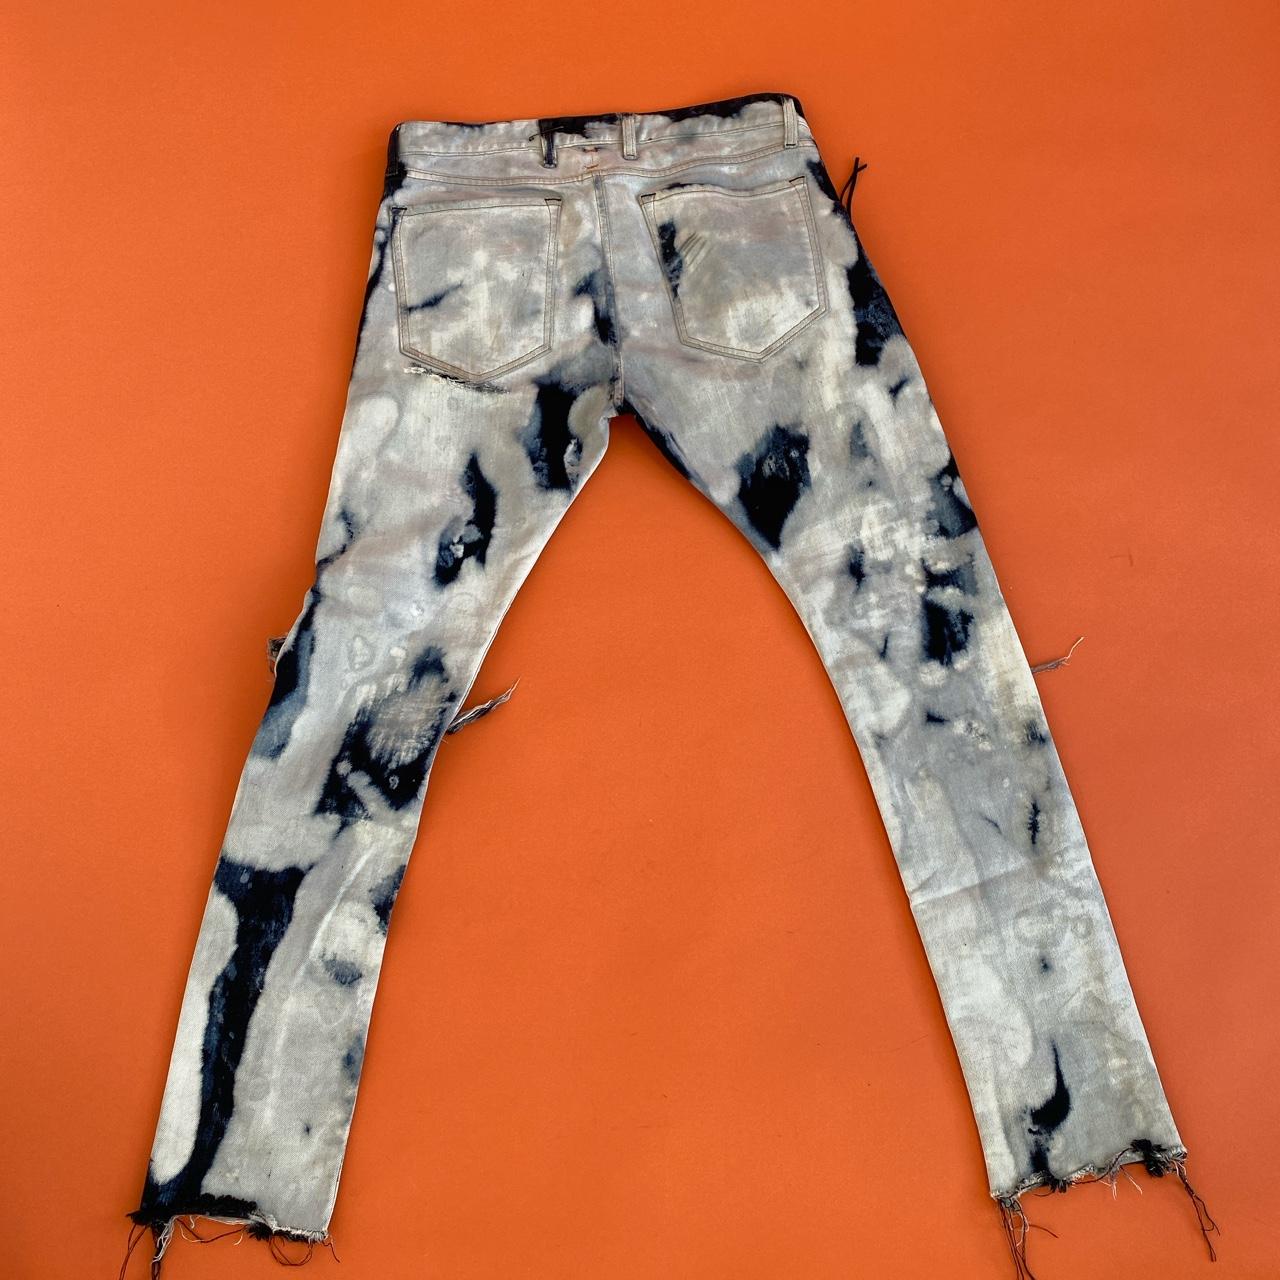 Product Image 4 - Unisex Mr.Completely Jeans
Waist 31 “